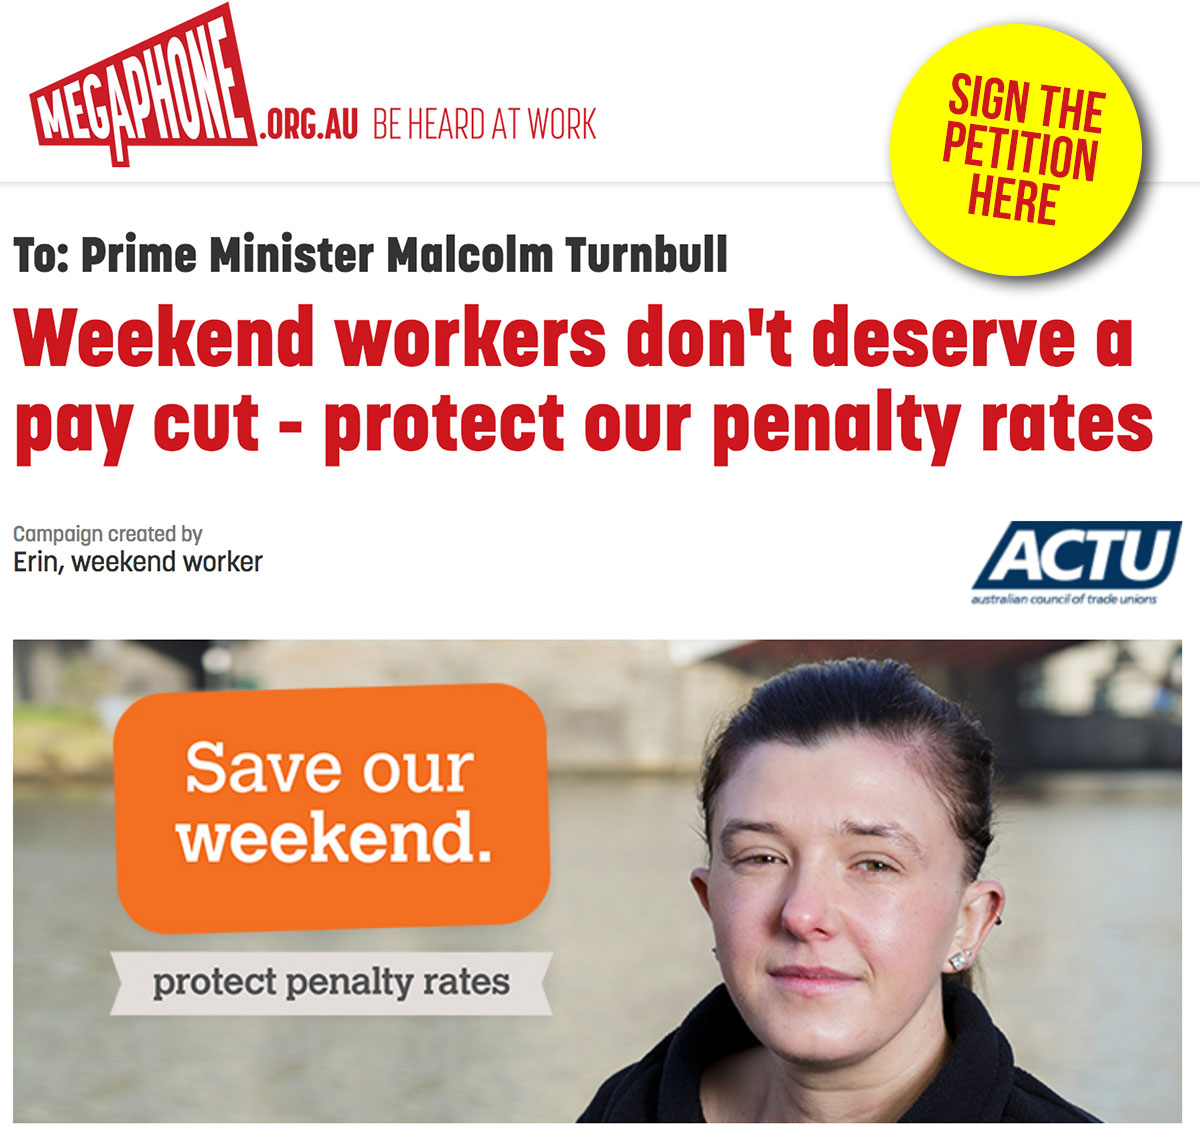 Save Penalty rates